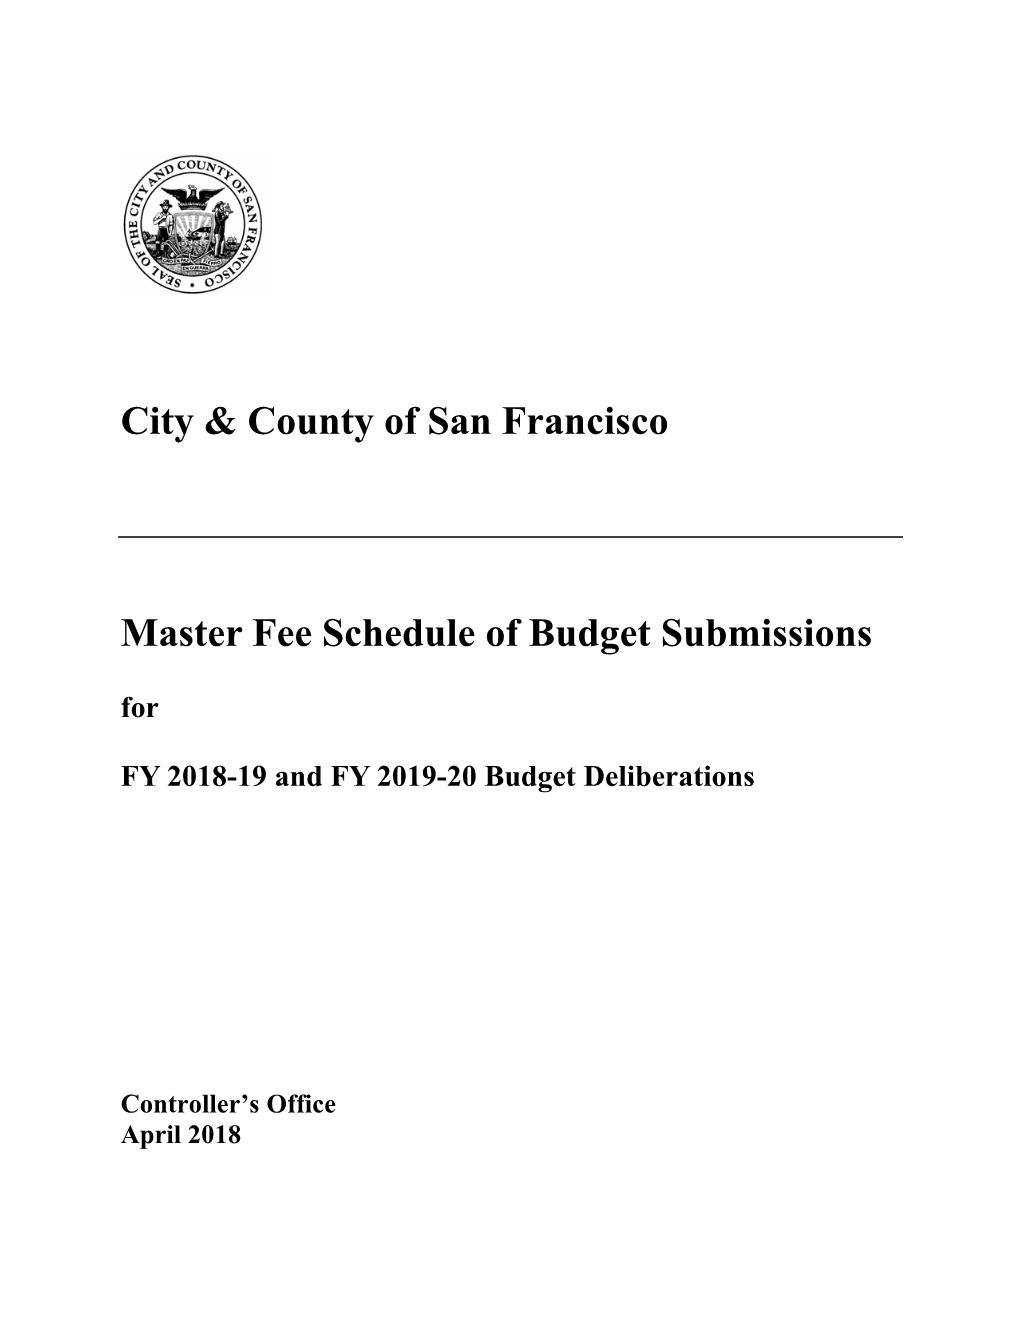 City & County of San Francisco Master Fee Schedule of Budget